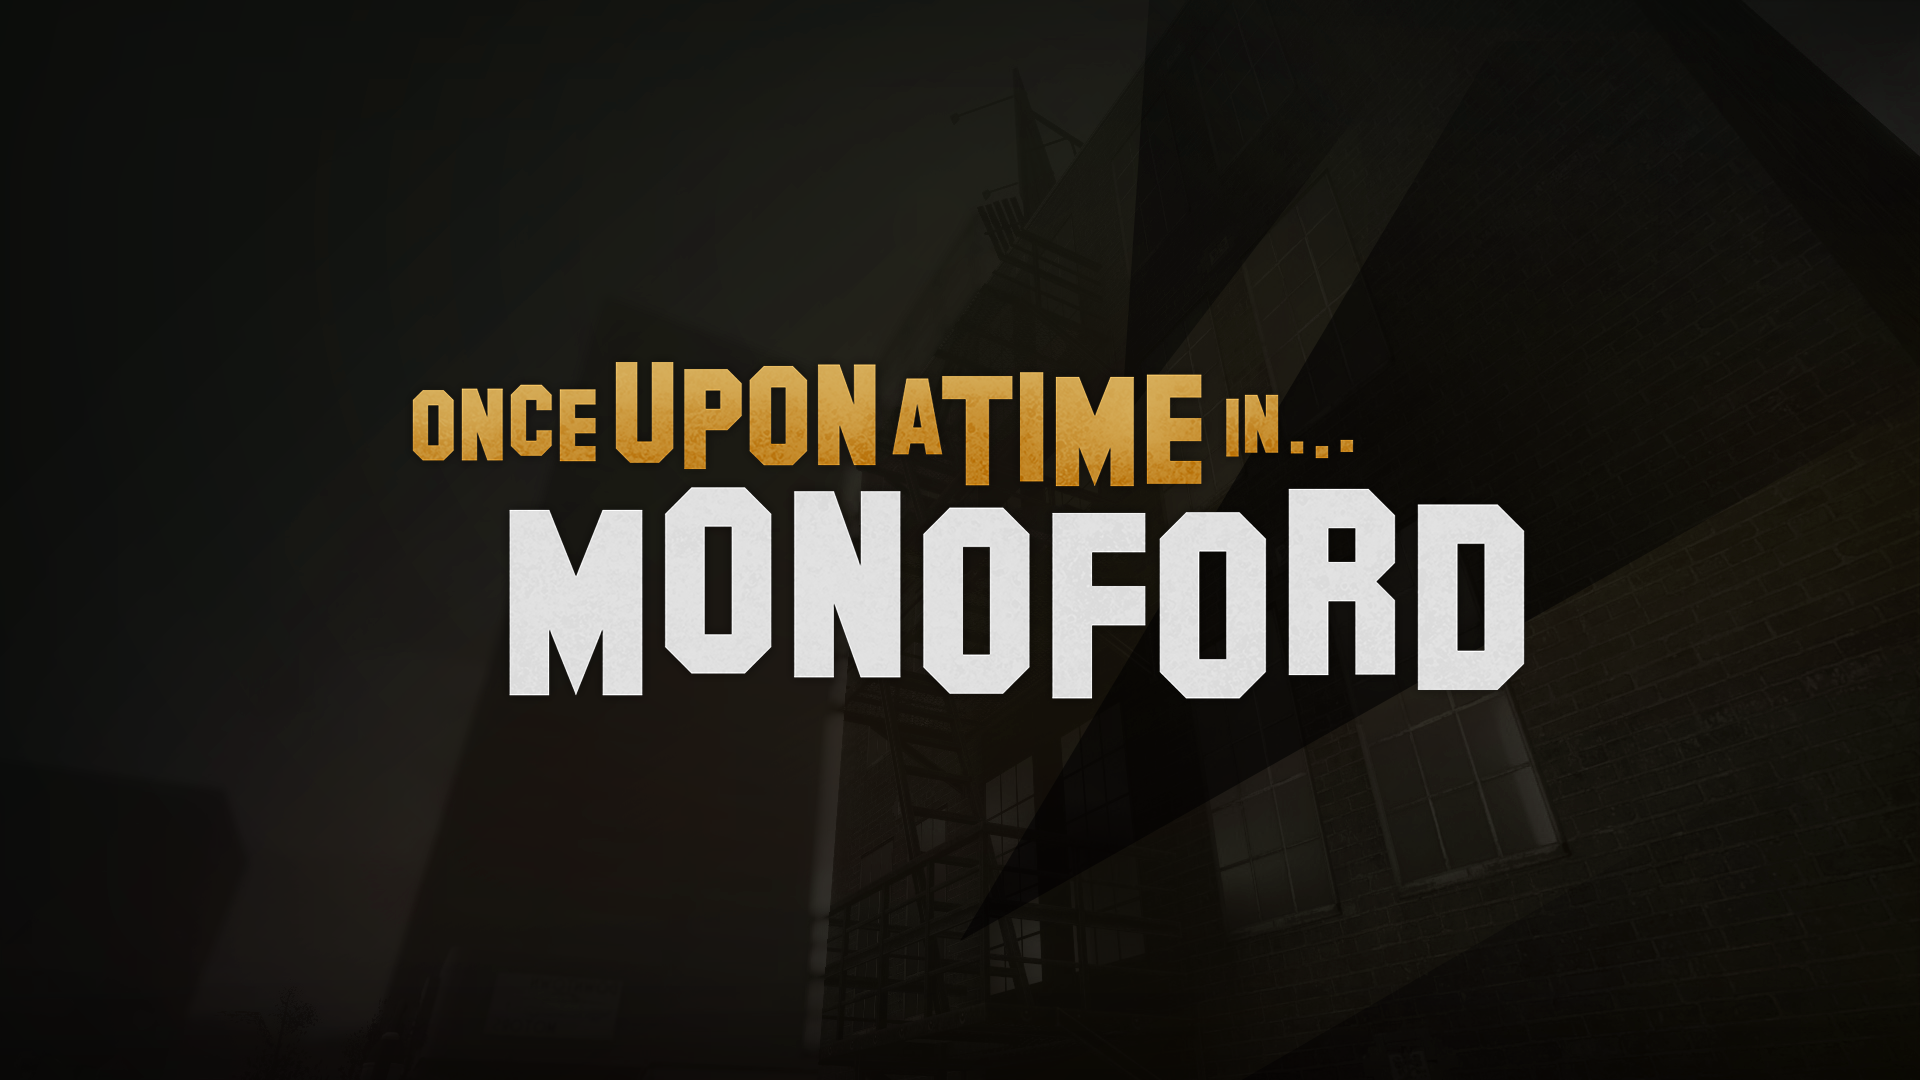 Monolith-Monoford-Background.png